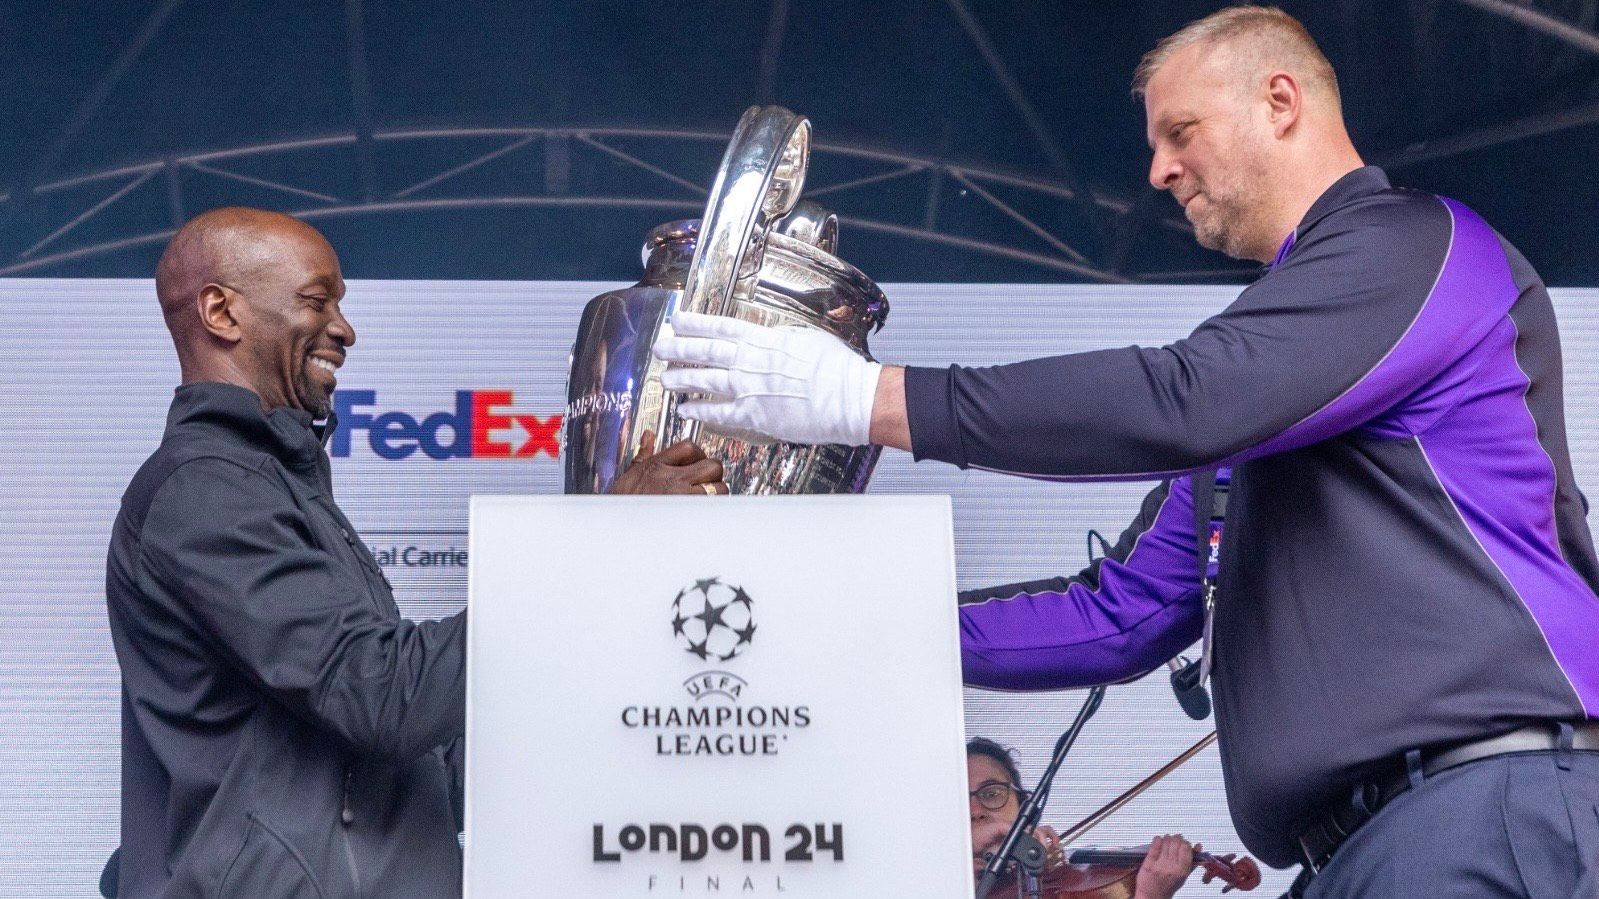 Football fans surprised with incredible live performance of iconic UEFA Champions League anthem as FedEx deliver the trophy to London ahead of huge Borussia Dortmund vs Real Madrid final at Wembley | Goal.com UK